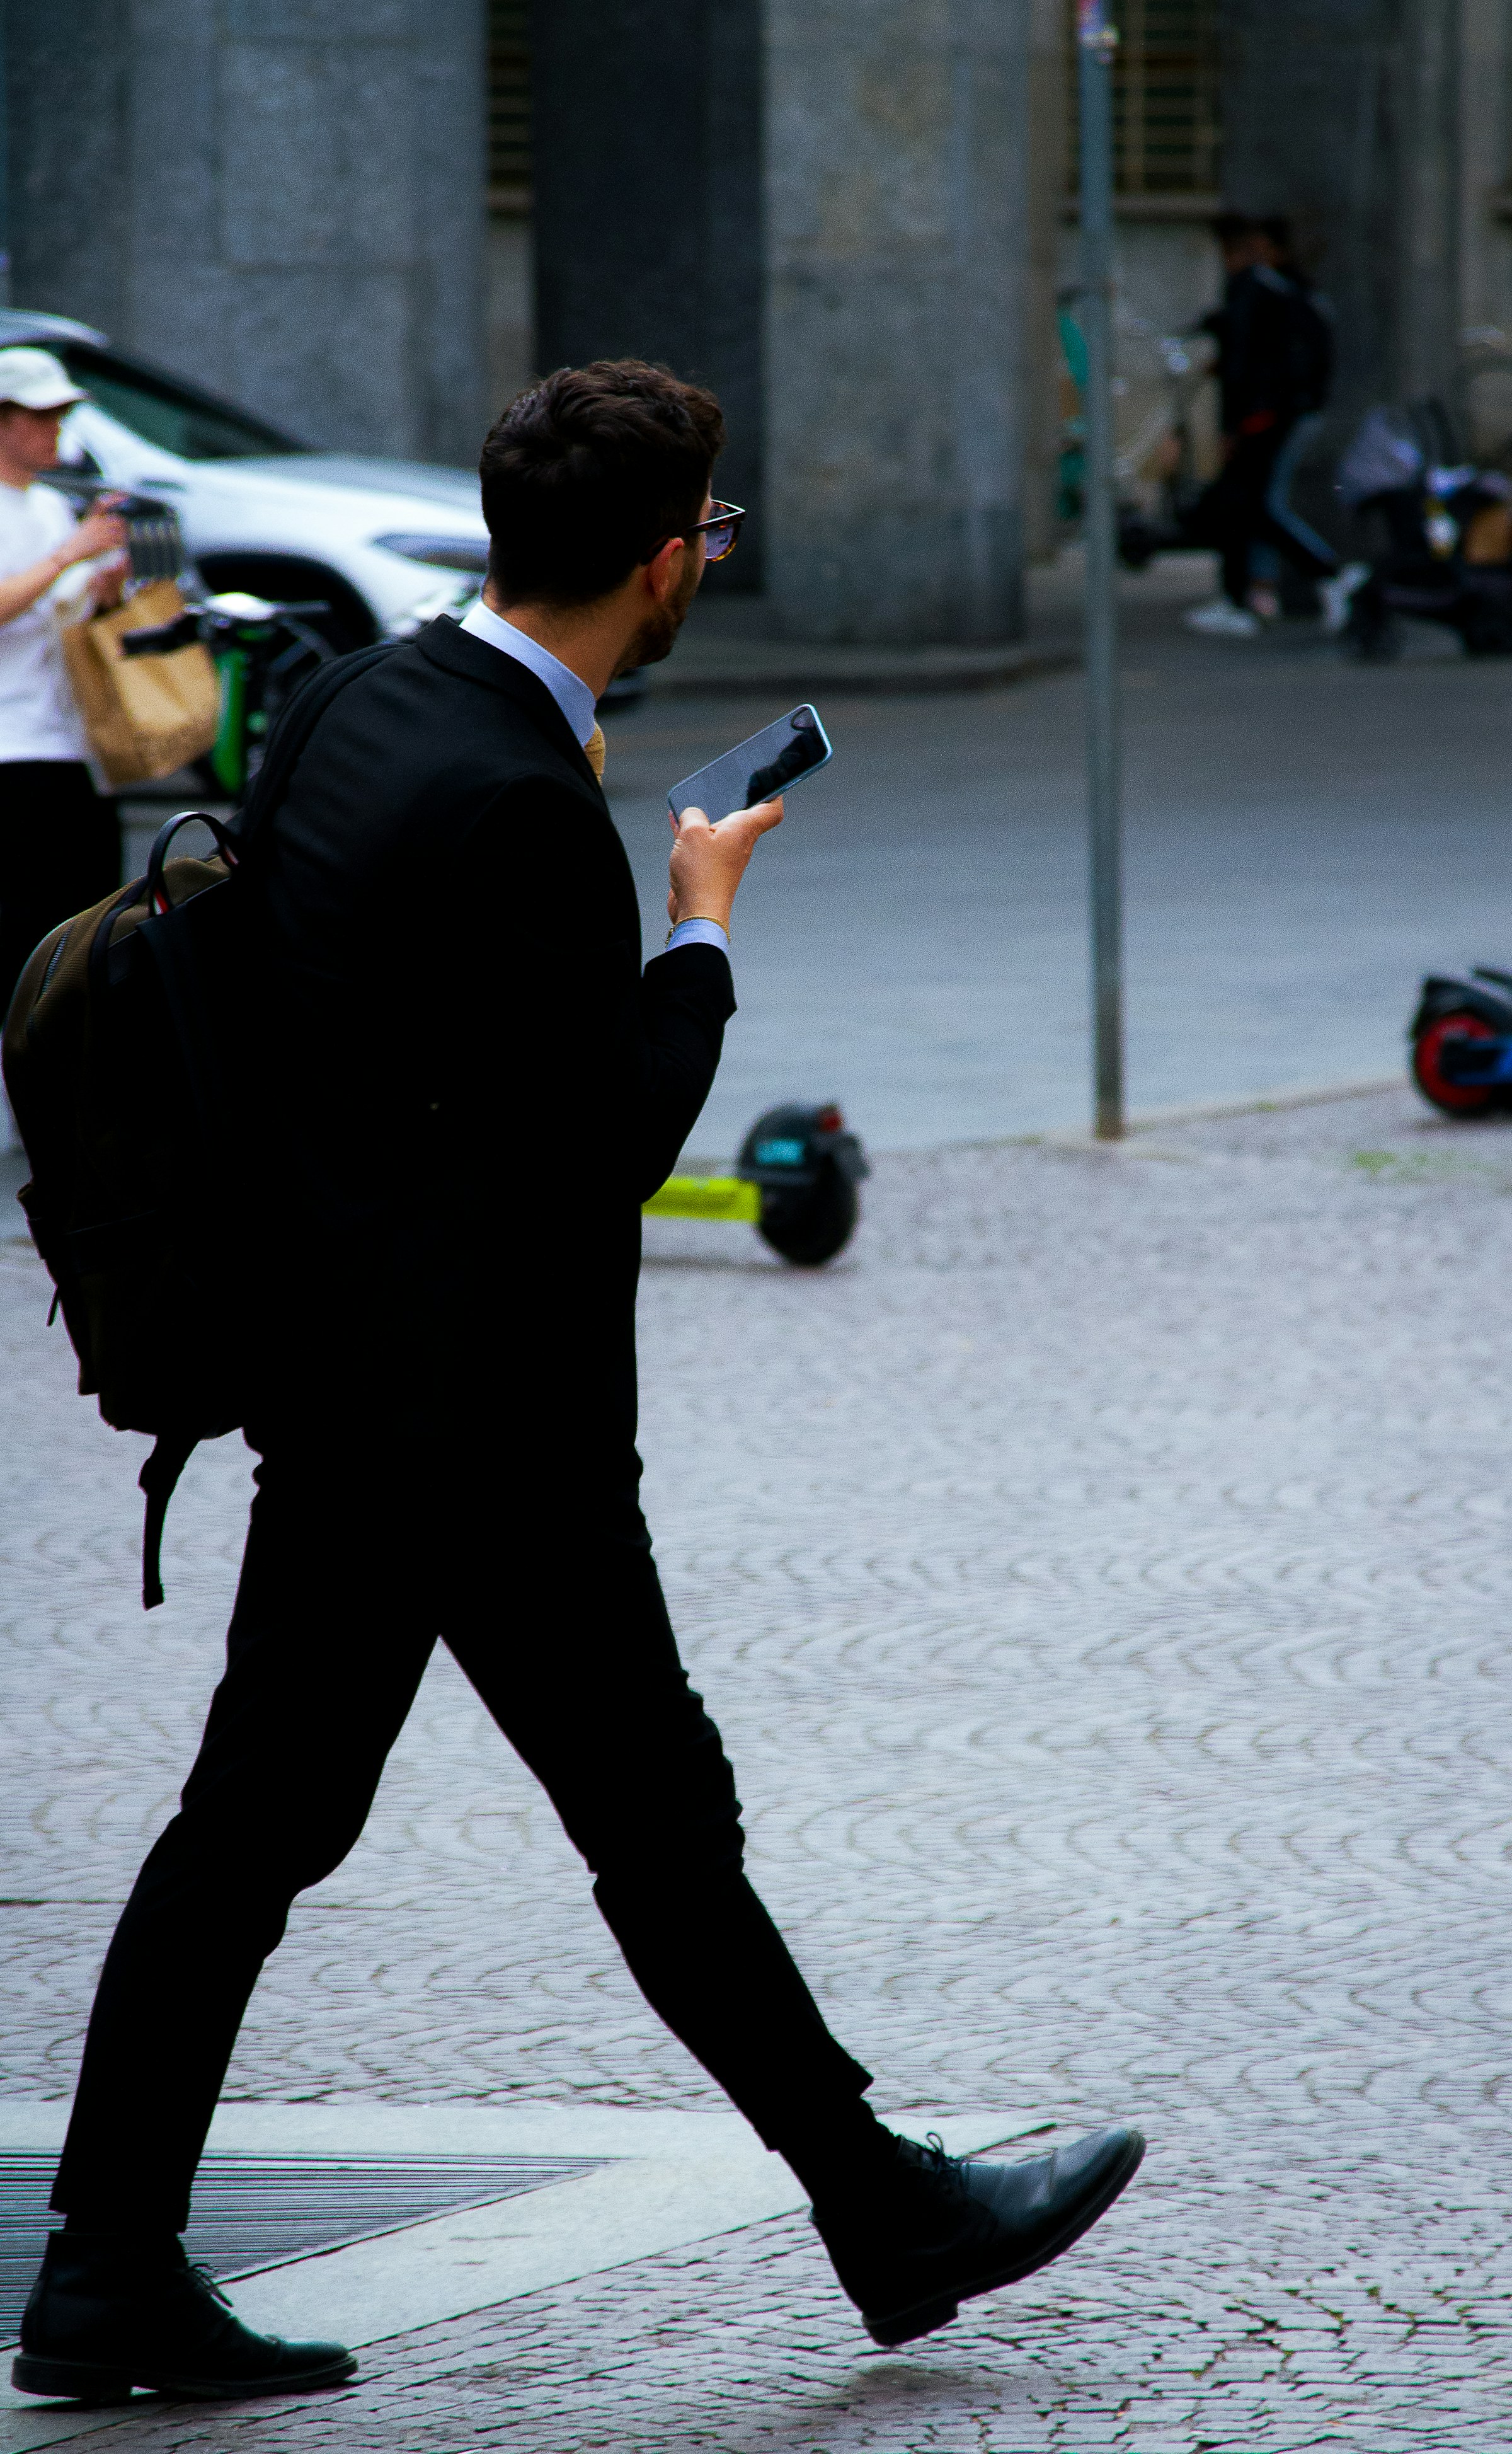 Businessman walking on the street with his phone in his hand | Source: Unsplash